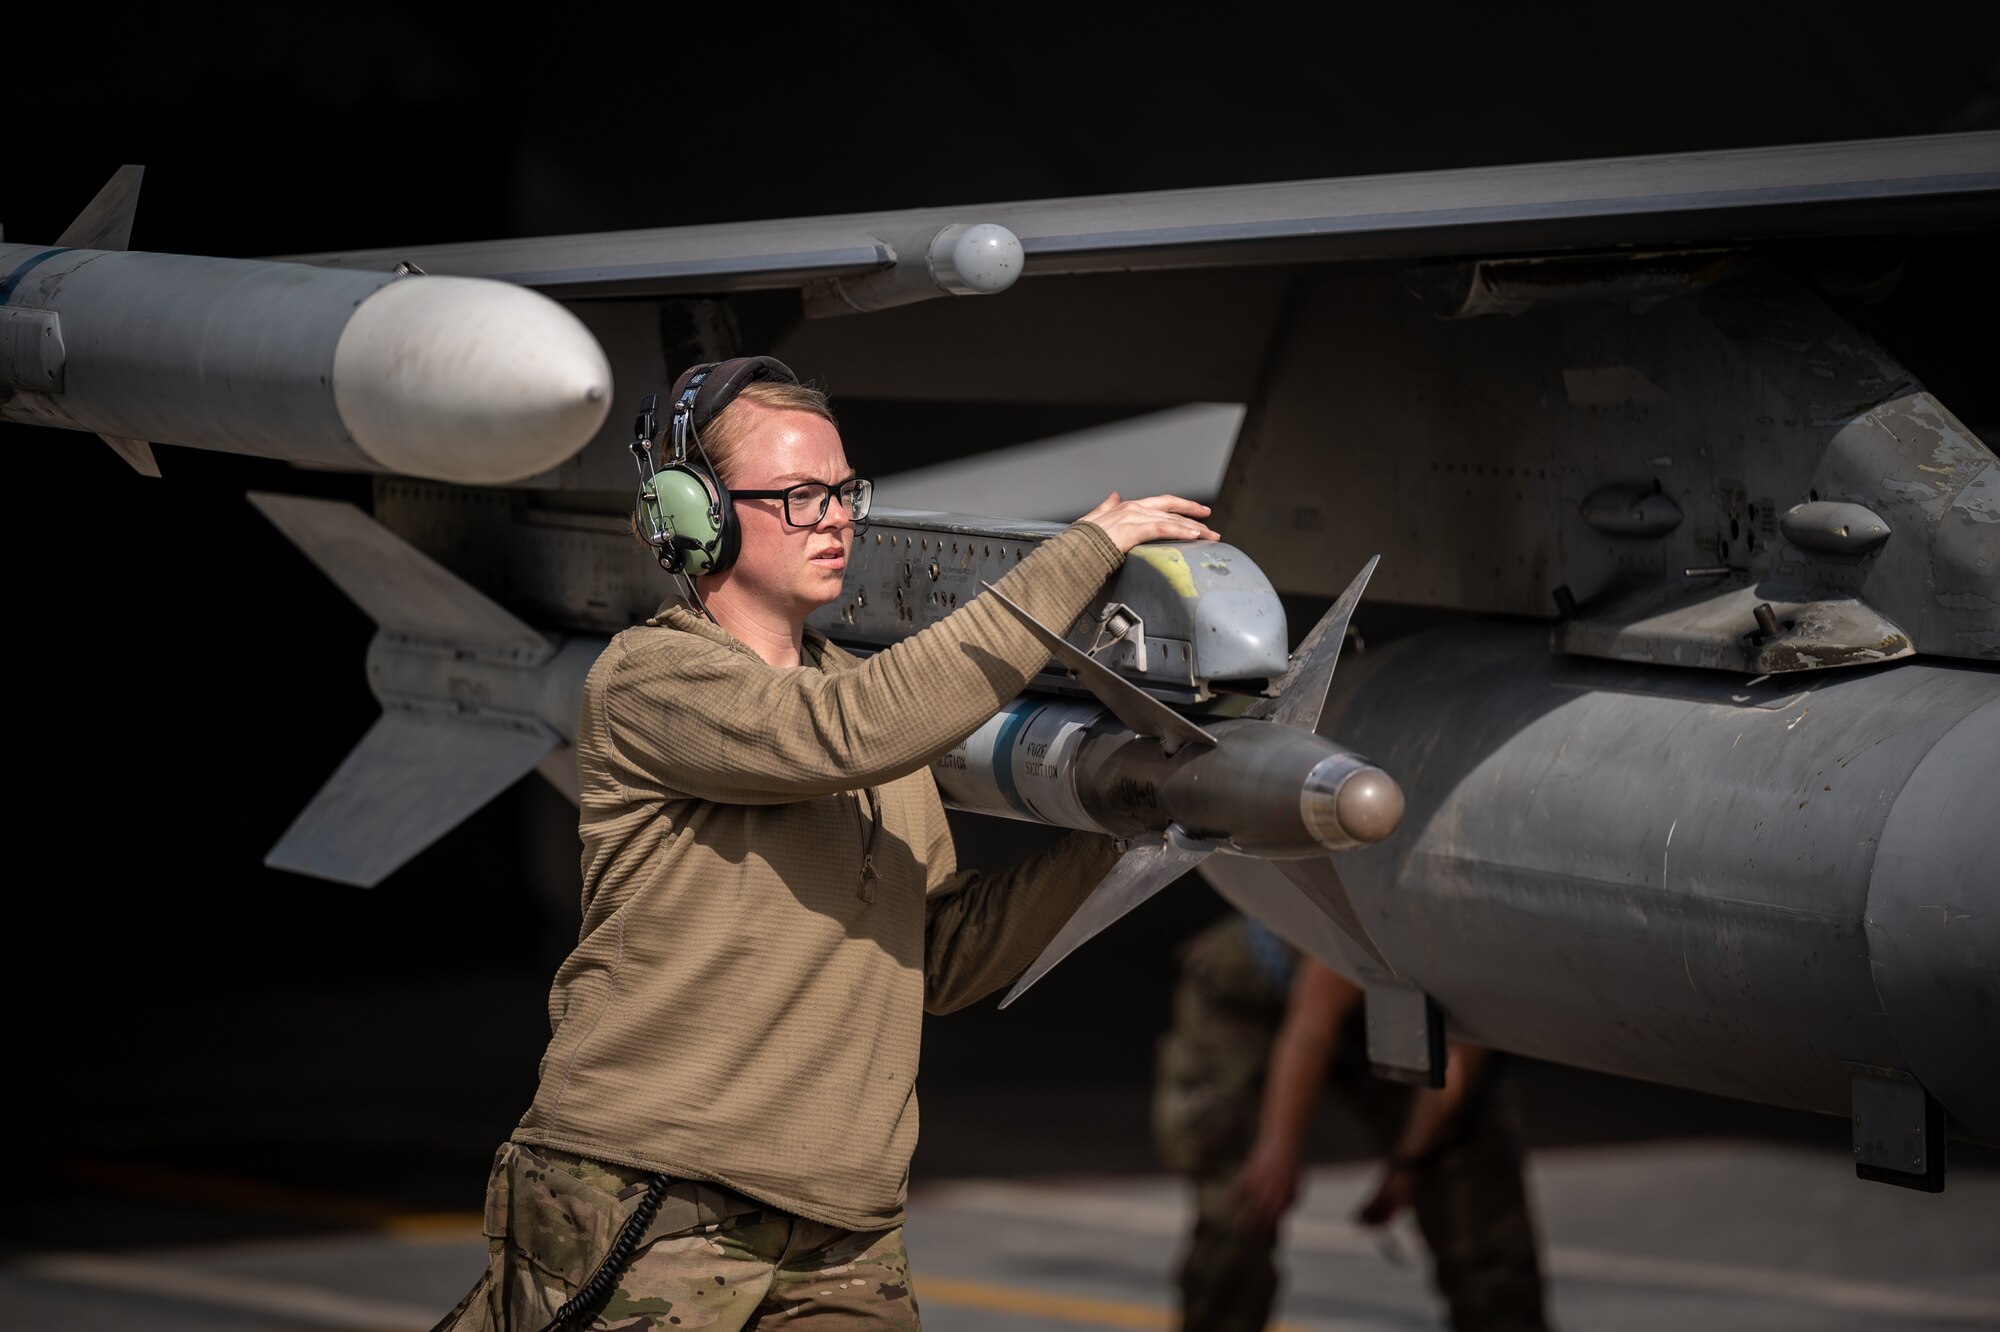 Staff Sgt. Savanna Huntzinger, 55th Expeditionary Fighter Generation Squadron weapons load crew member, performs end of runway arming prior to launching an F-16 Fighting Falcon for its departure from a Pakistan operational air force base, March 5, 2022. Falcon Talon 2022, an Agile Combat Employment operation, is the first bilateral training event between the United States and Pakistan since 2019. (U.S. Air Force photo by Master Sgt. Christopher Parr).